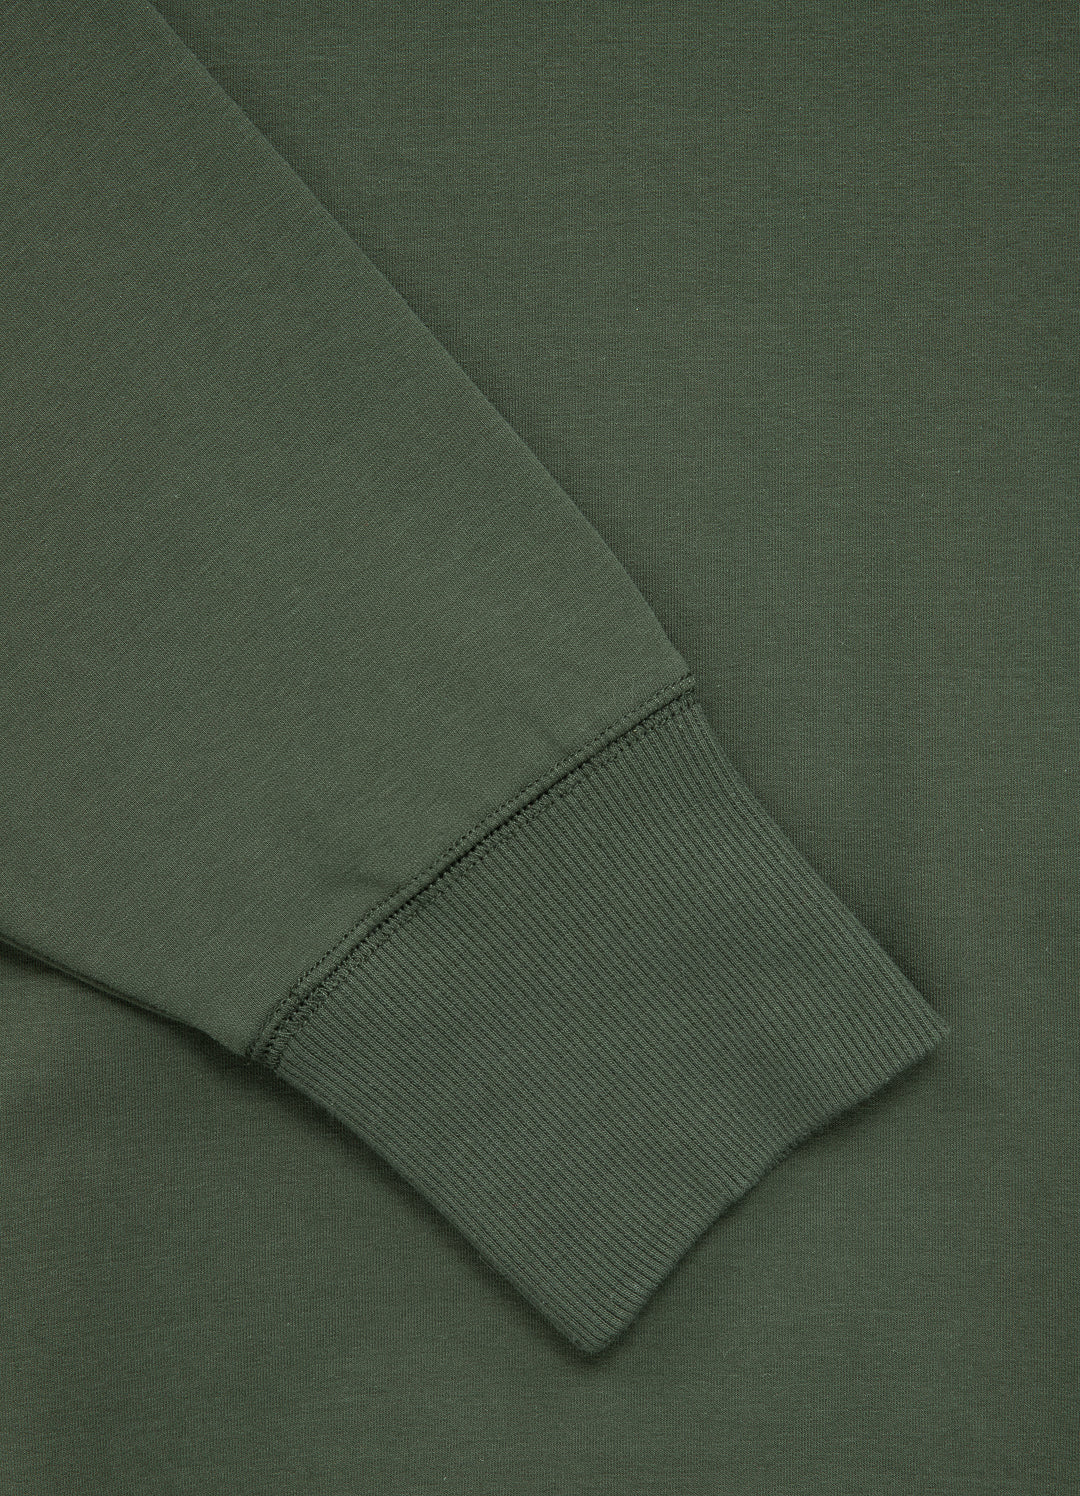 ASCOT French Terry Olive Crewneck.